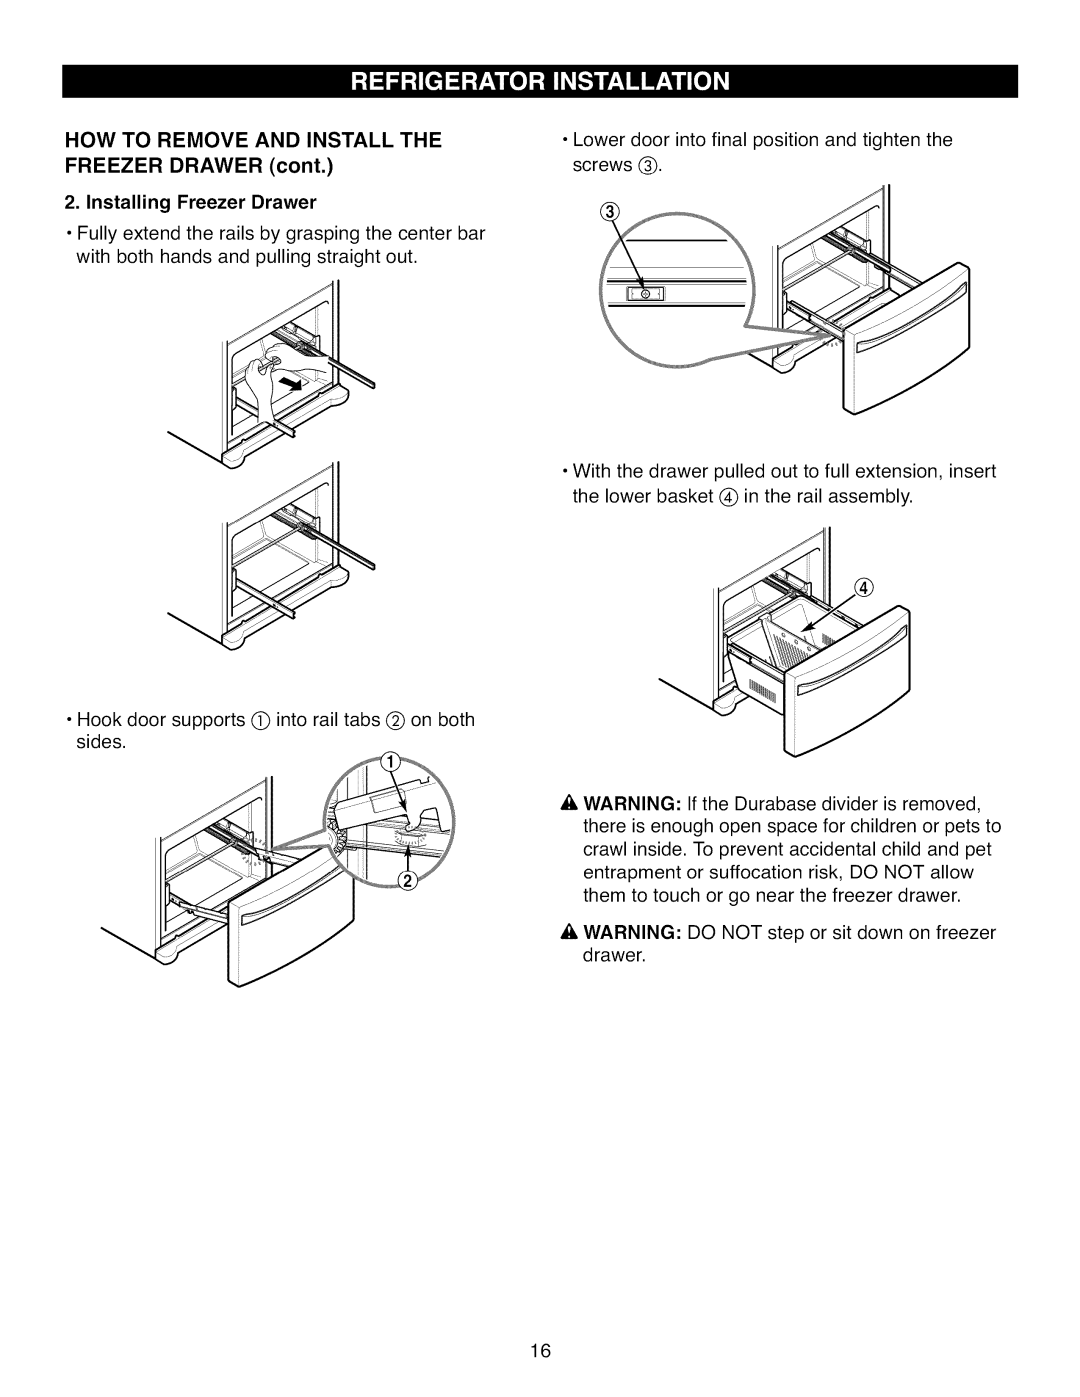 Kenmore 795.7104 manual HOW TO REMOVE AND INSTALL THE FREEZER DRAWER cont, Installing Freezer Drawer 